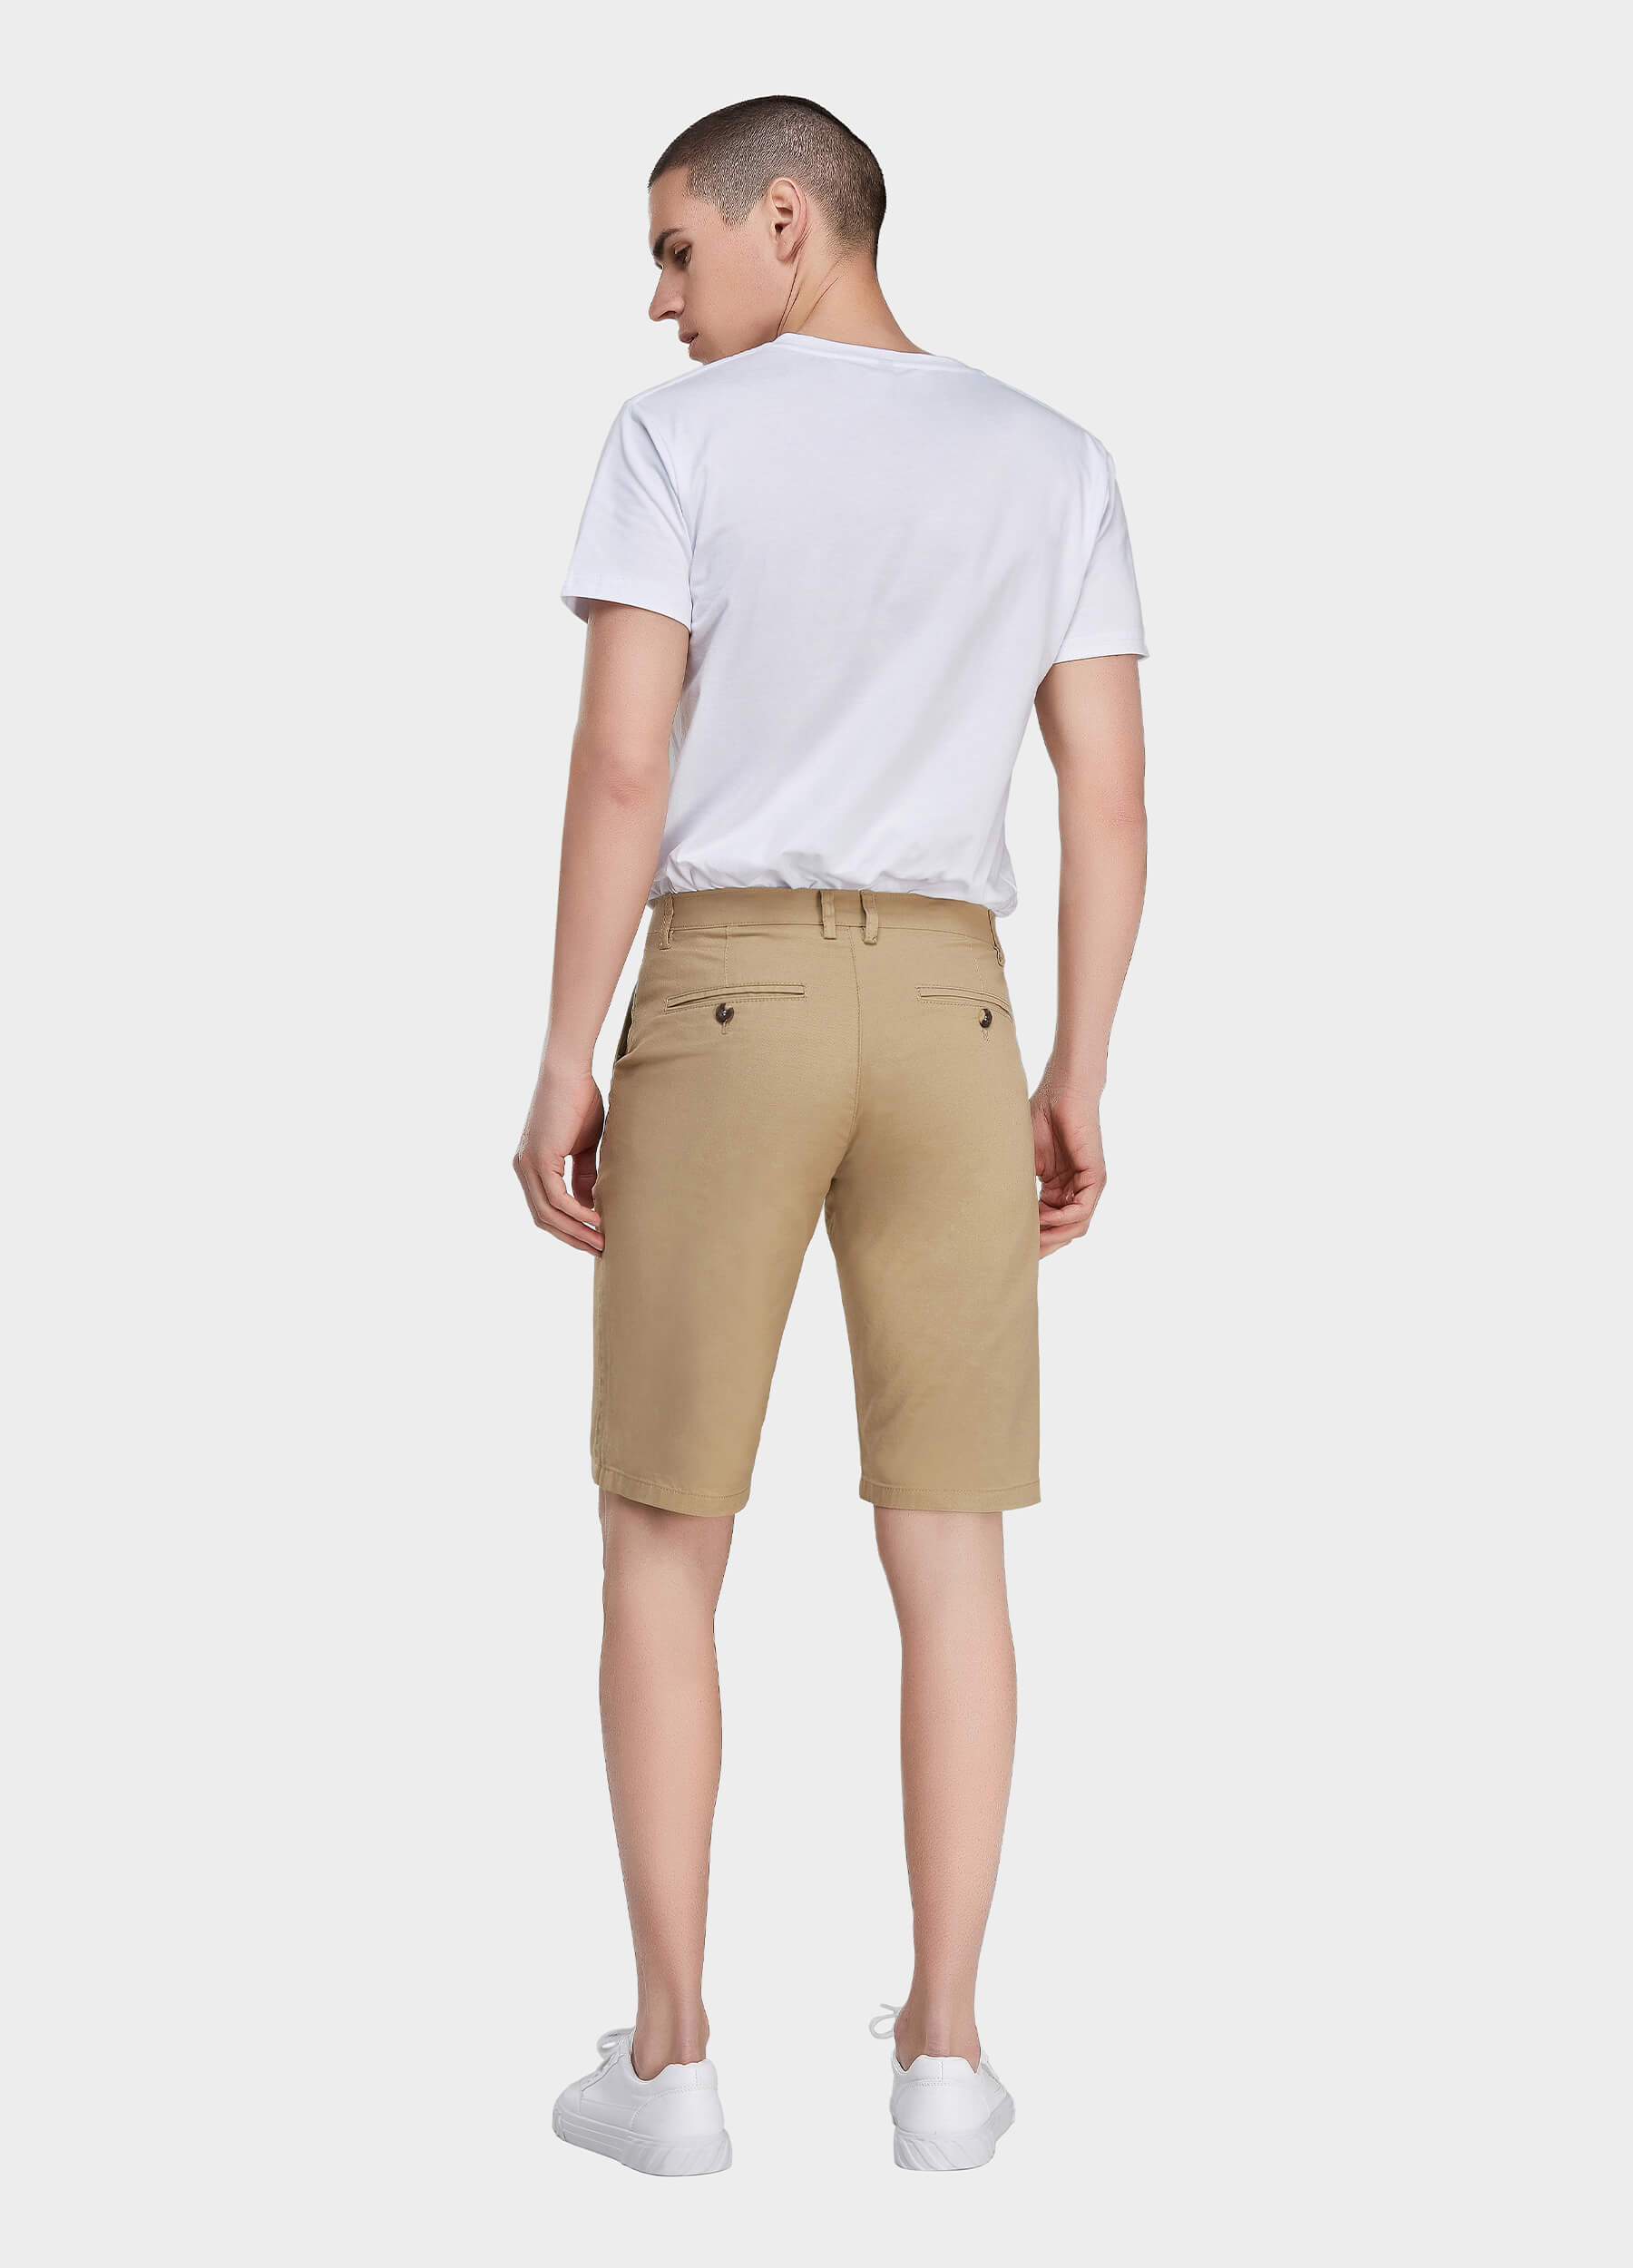 Men's Casual Zipper Fly Button Solid Shorts with Slant Pocket-Khaki back view